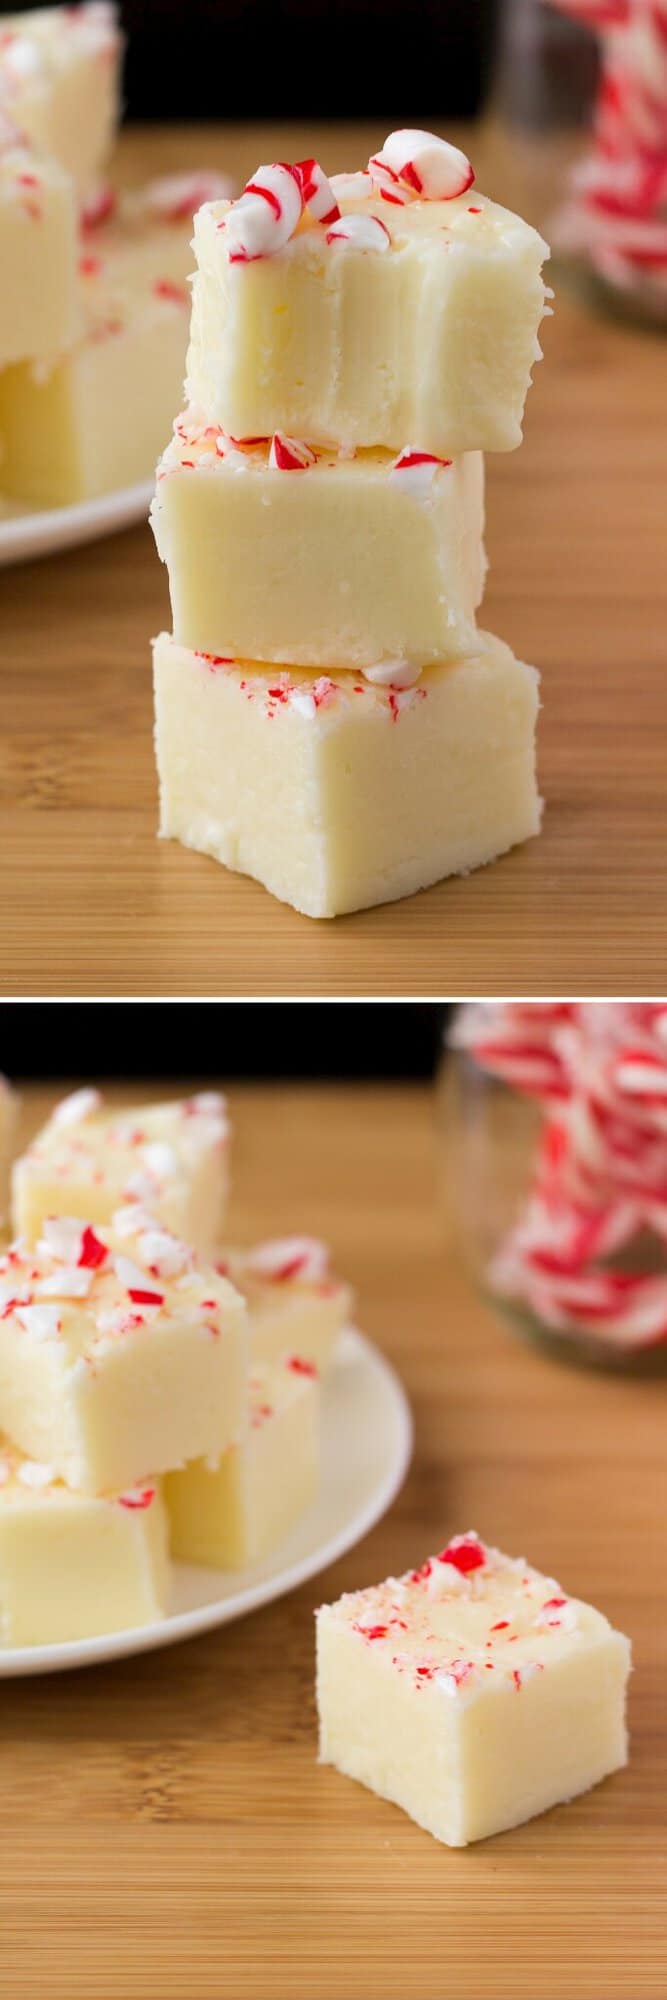 Creamy White Chocolate Peppermint Fudge. So delicious & perfect for the holidays - it makes a decadent, delicious gift! www.justsotasty.com